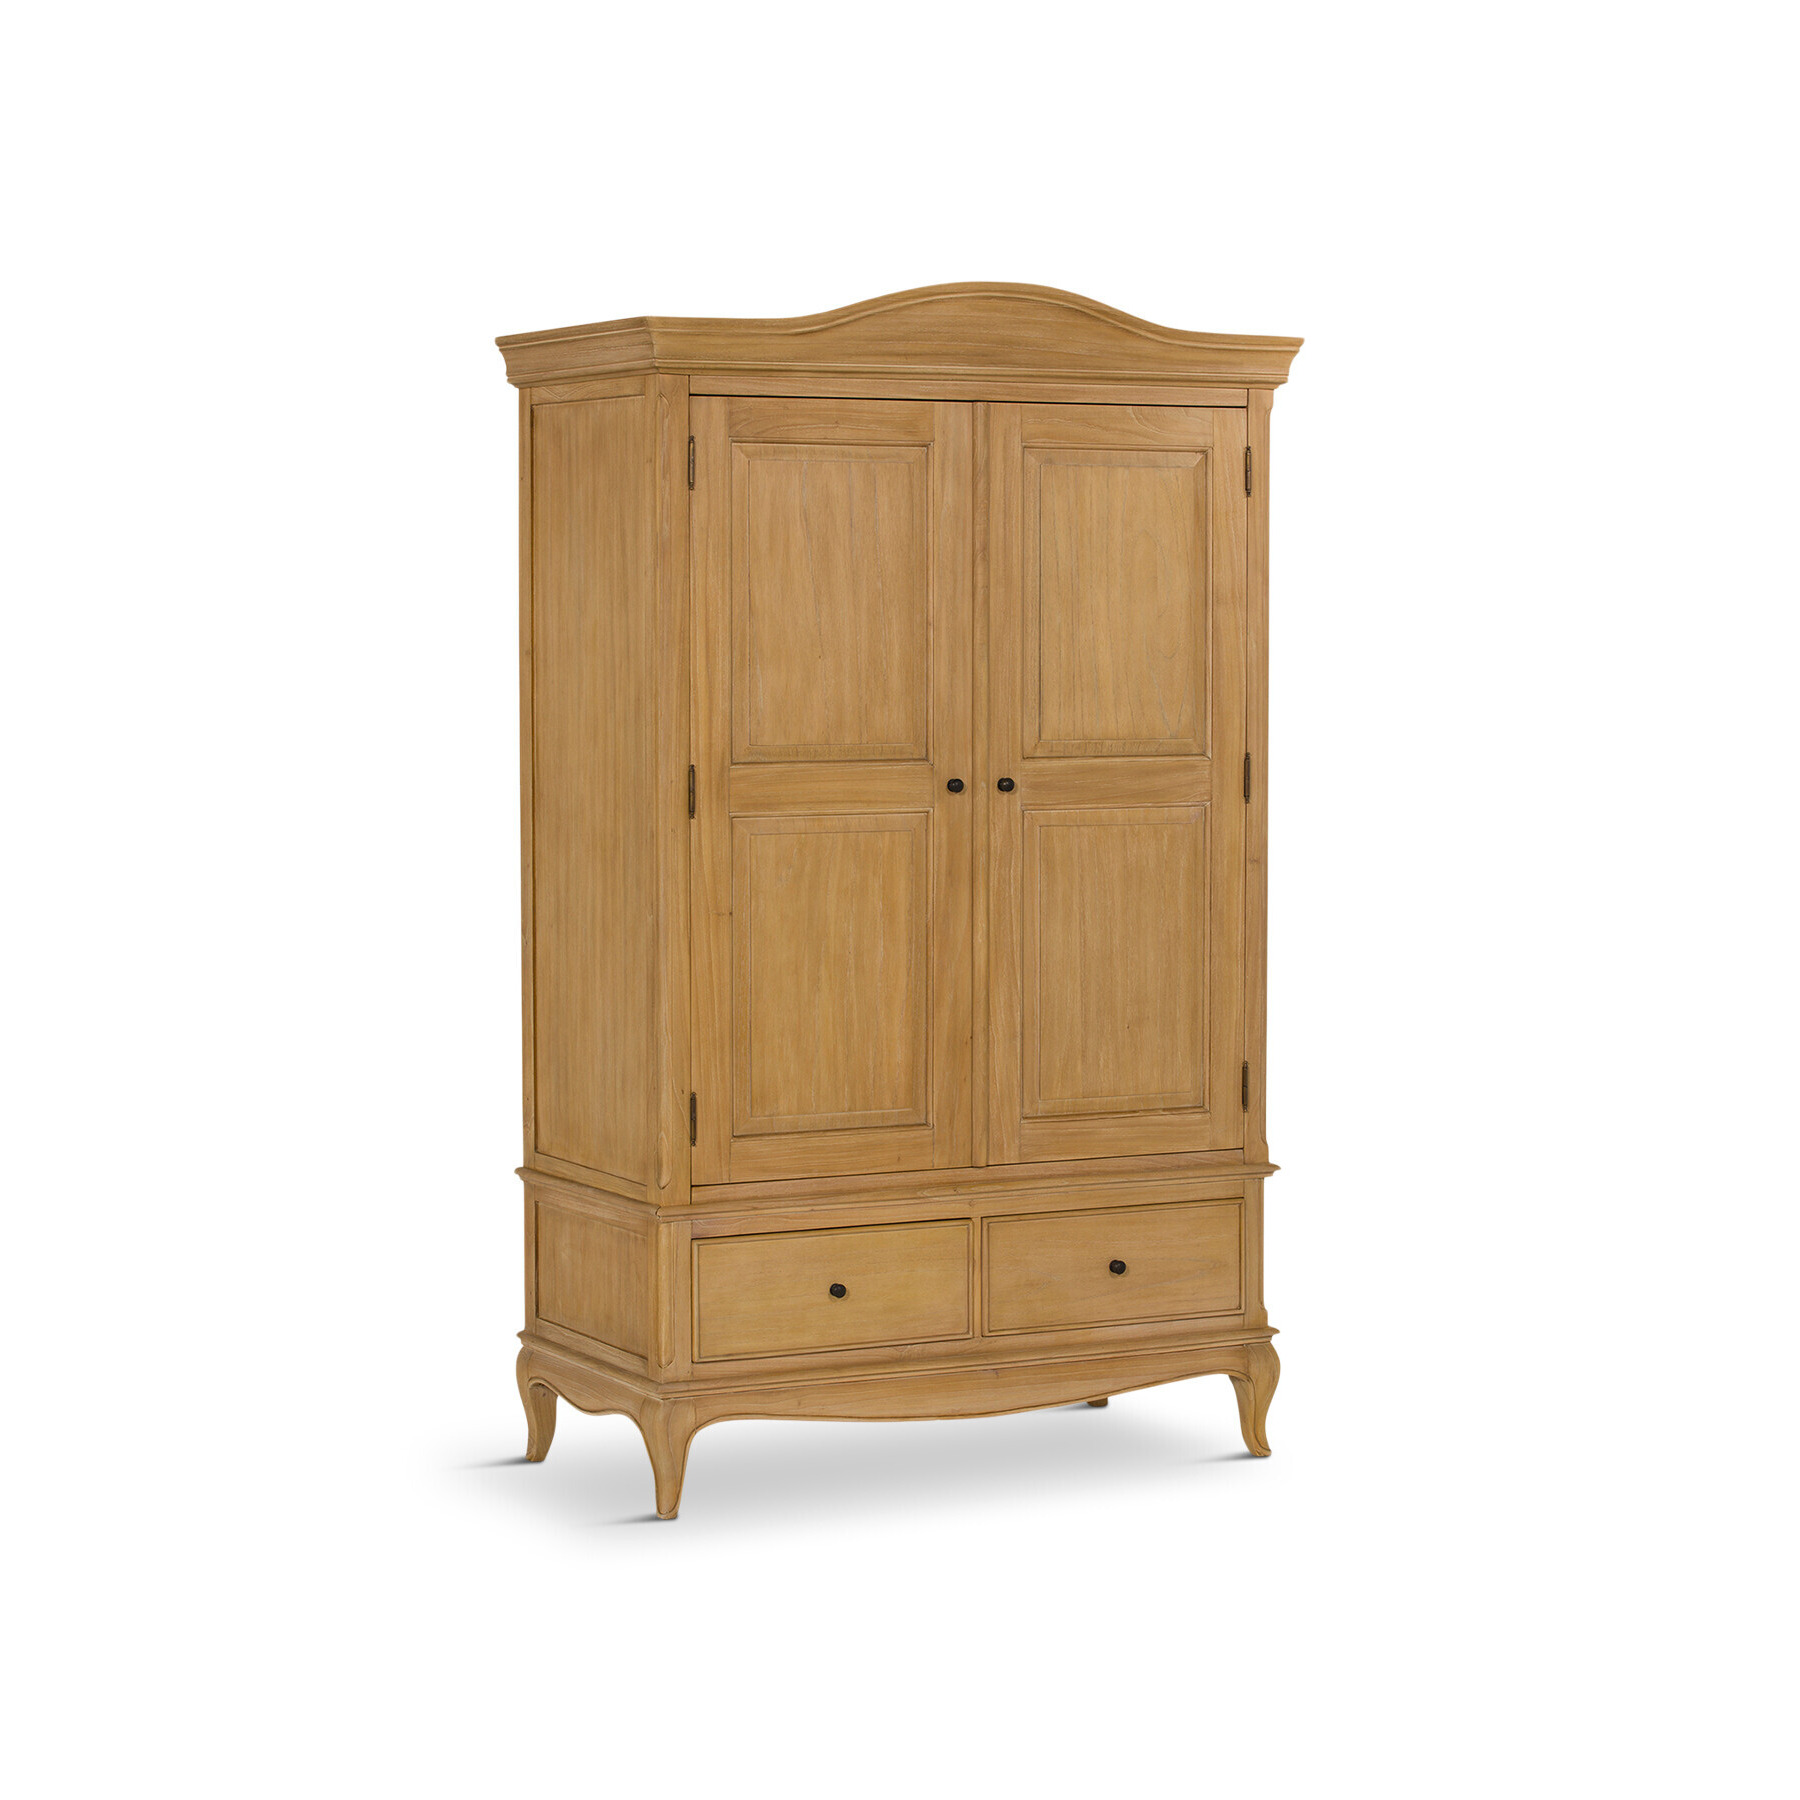 Barker and Stonehouse Cecile Light Wooden French Style Double Wardrobe With Drawers Neutral - image 1